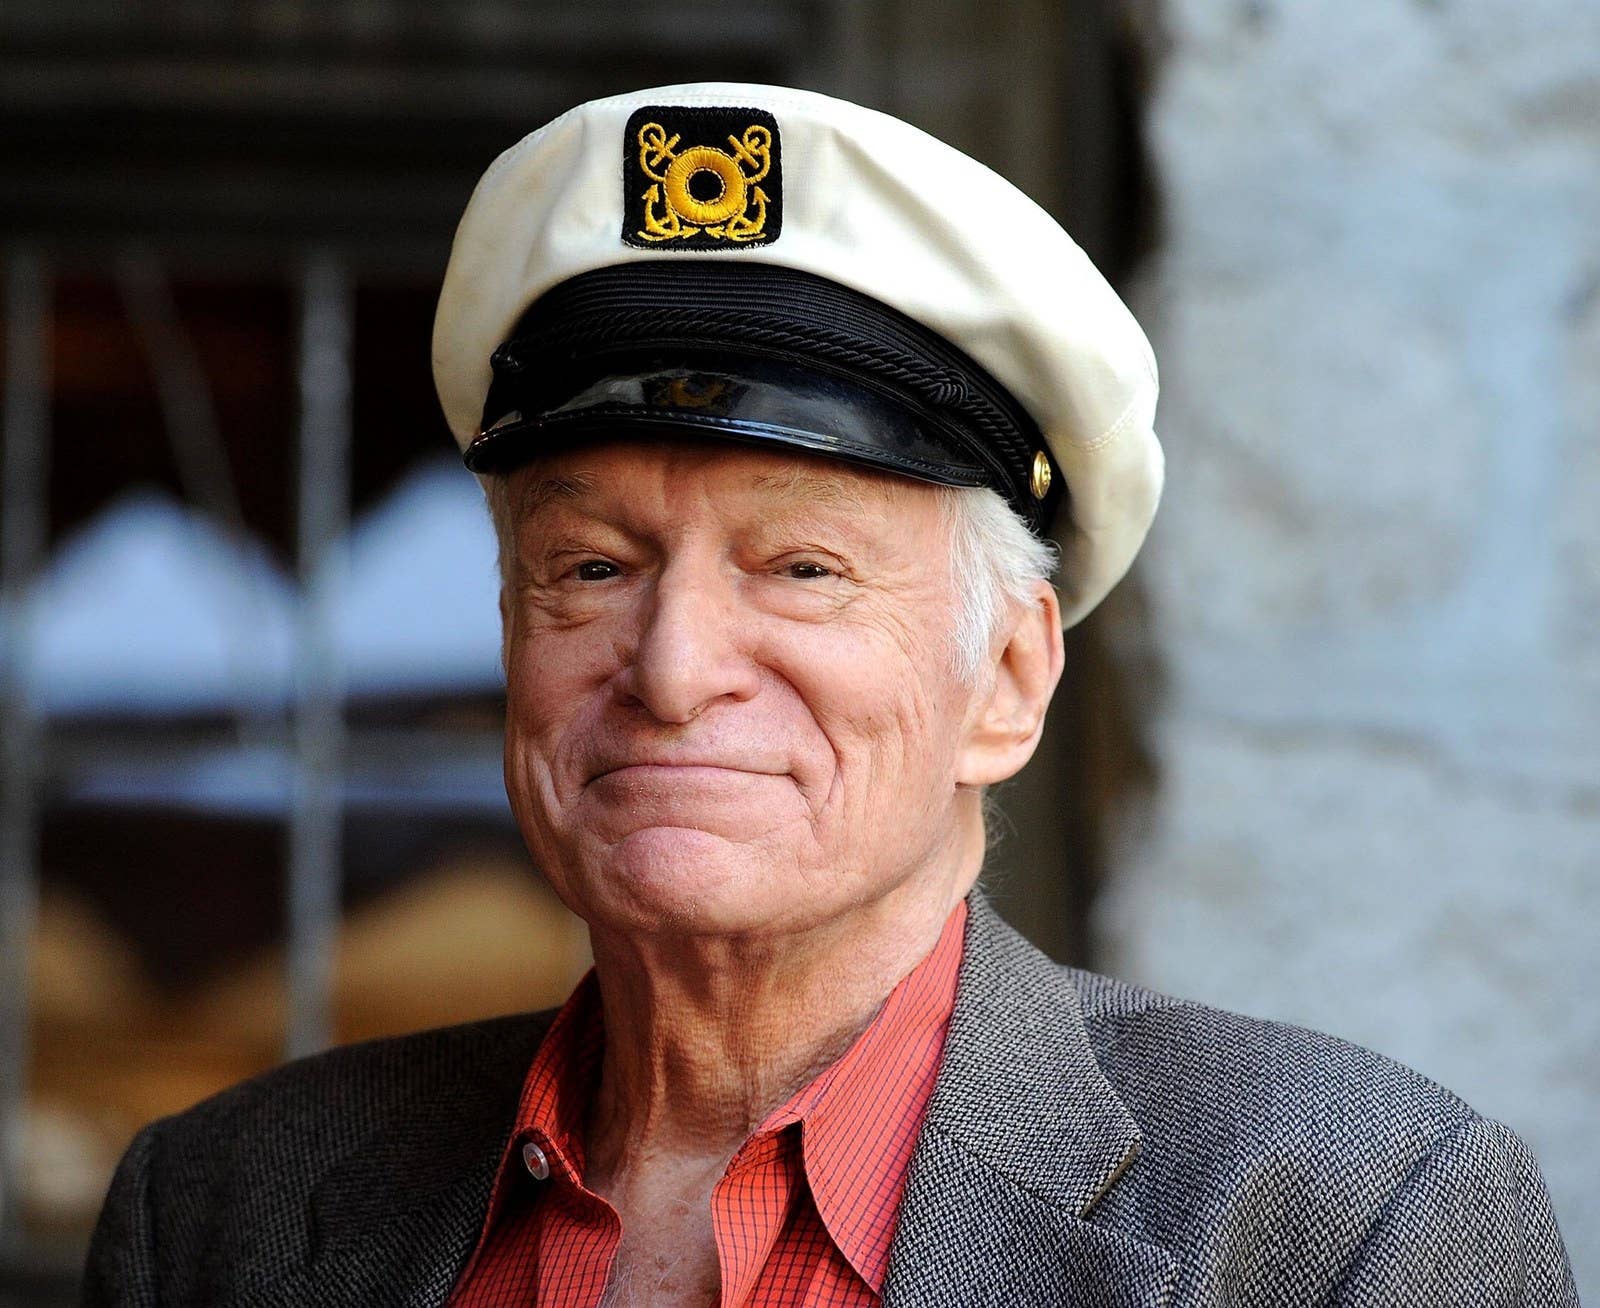 Hefner arrives at the 2011 Playboy Jazz Festival at the Playboy Mansion on Feb. 10, 2011, in Beverly Hills.